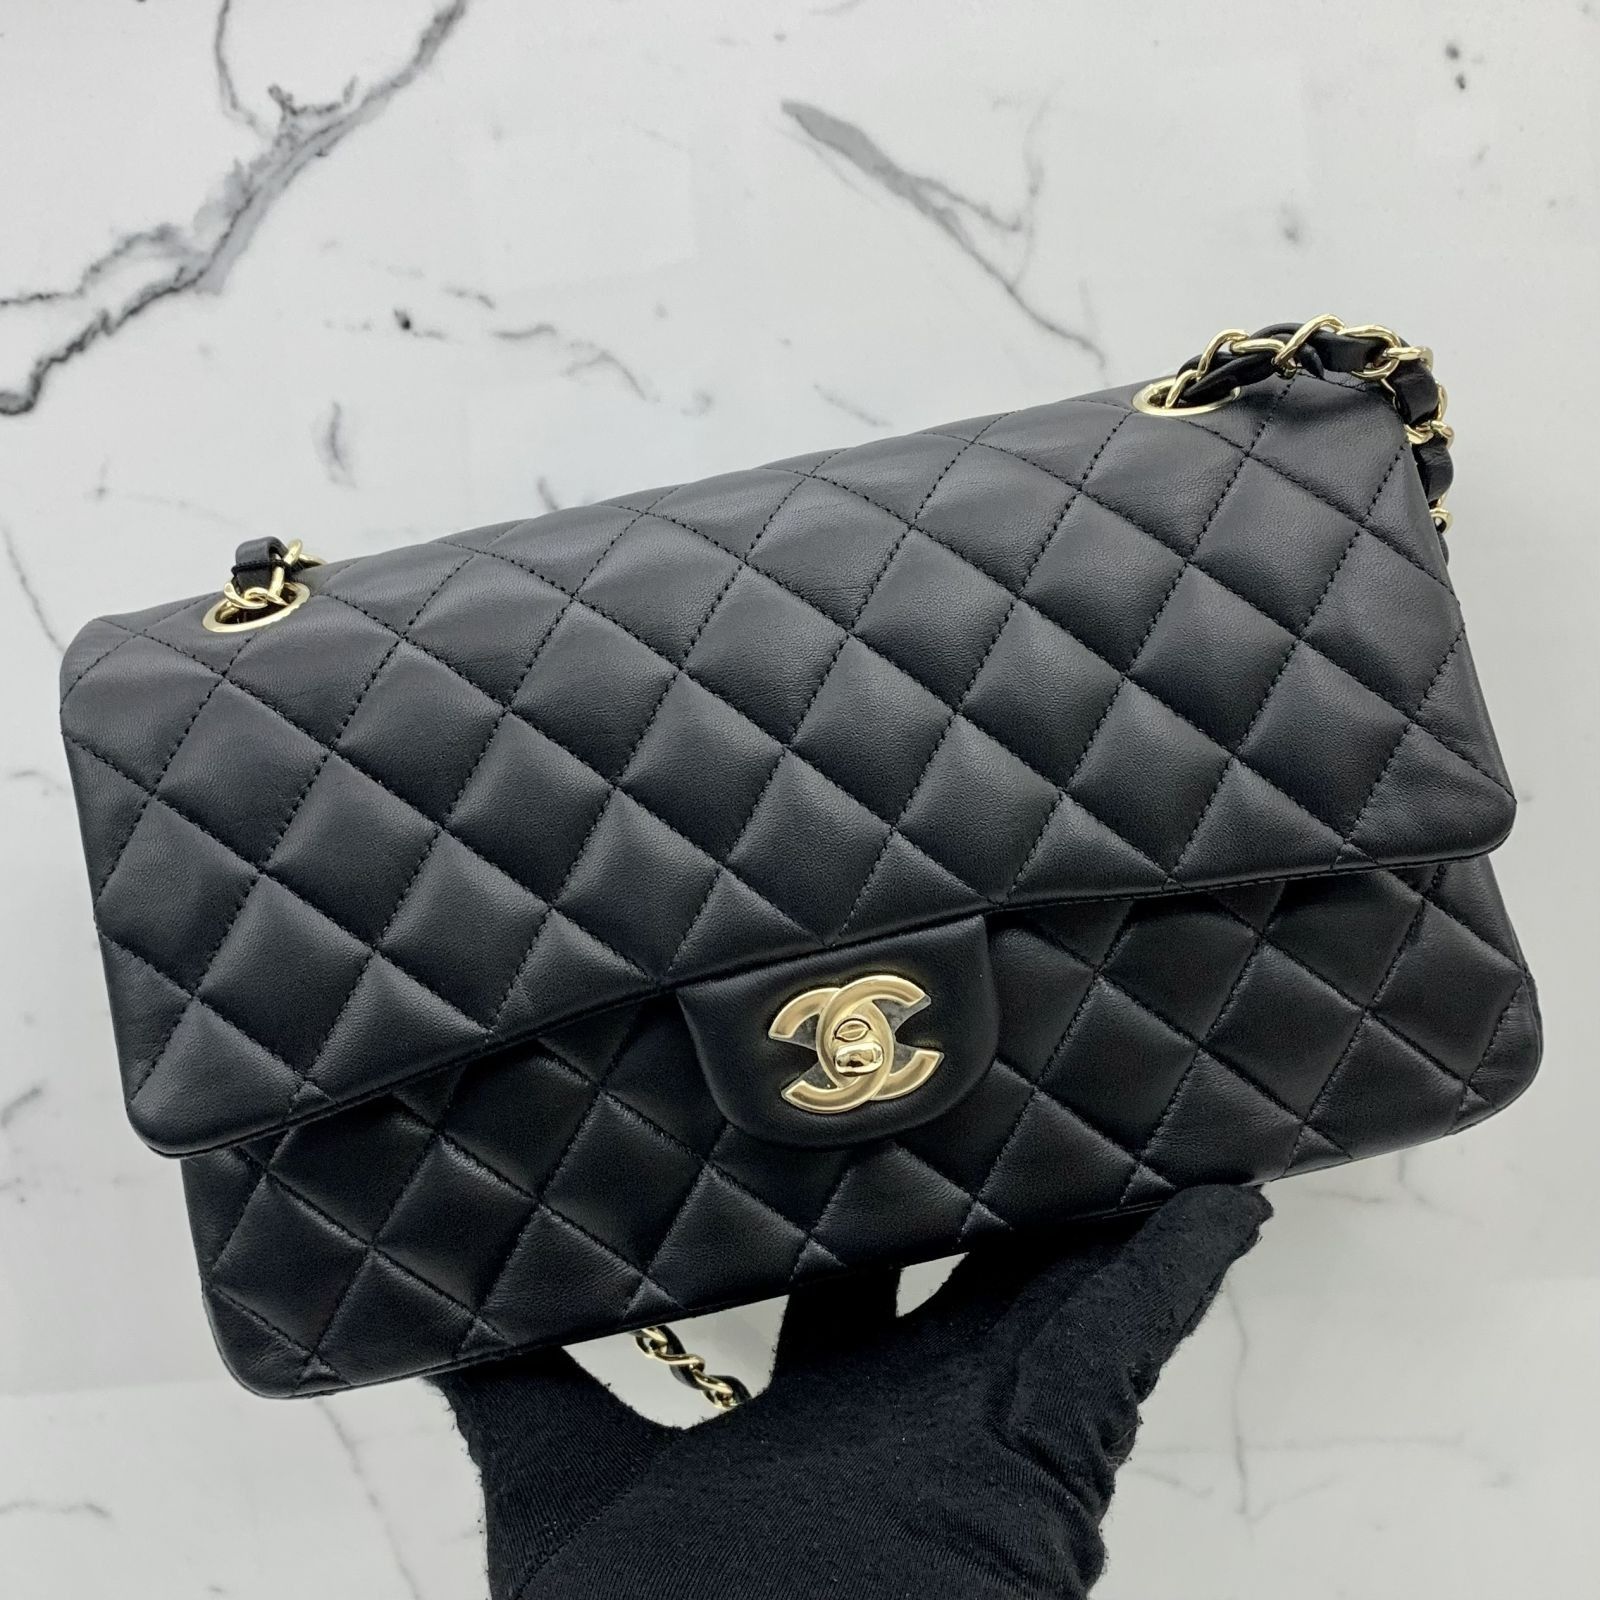 Purse Insert for Chanel Classic Medium Flap Bag (Style A01112)